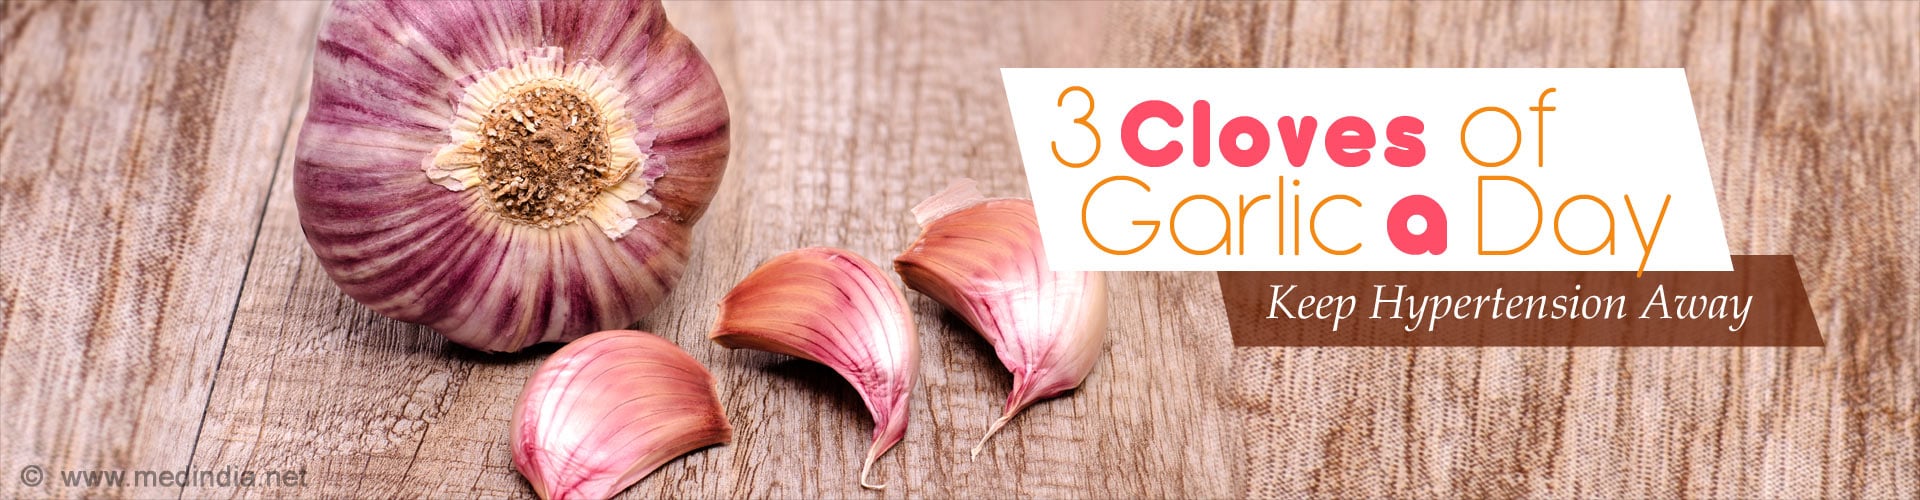 3 Cloves of Garlic a Day to Keep Hypertension Away